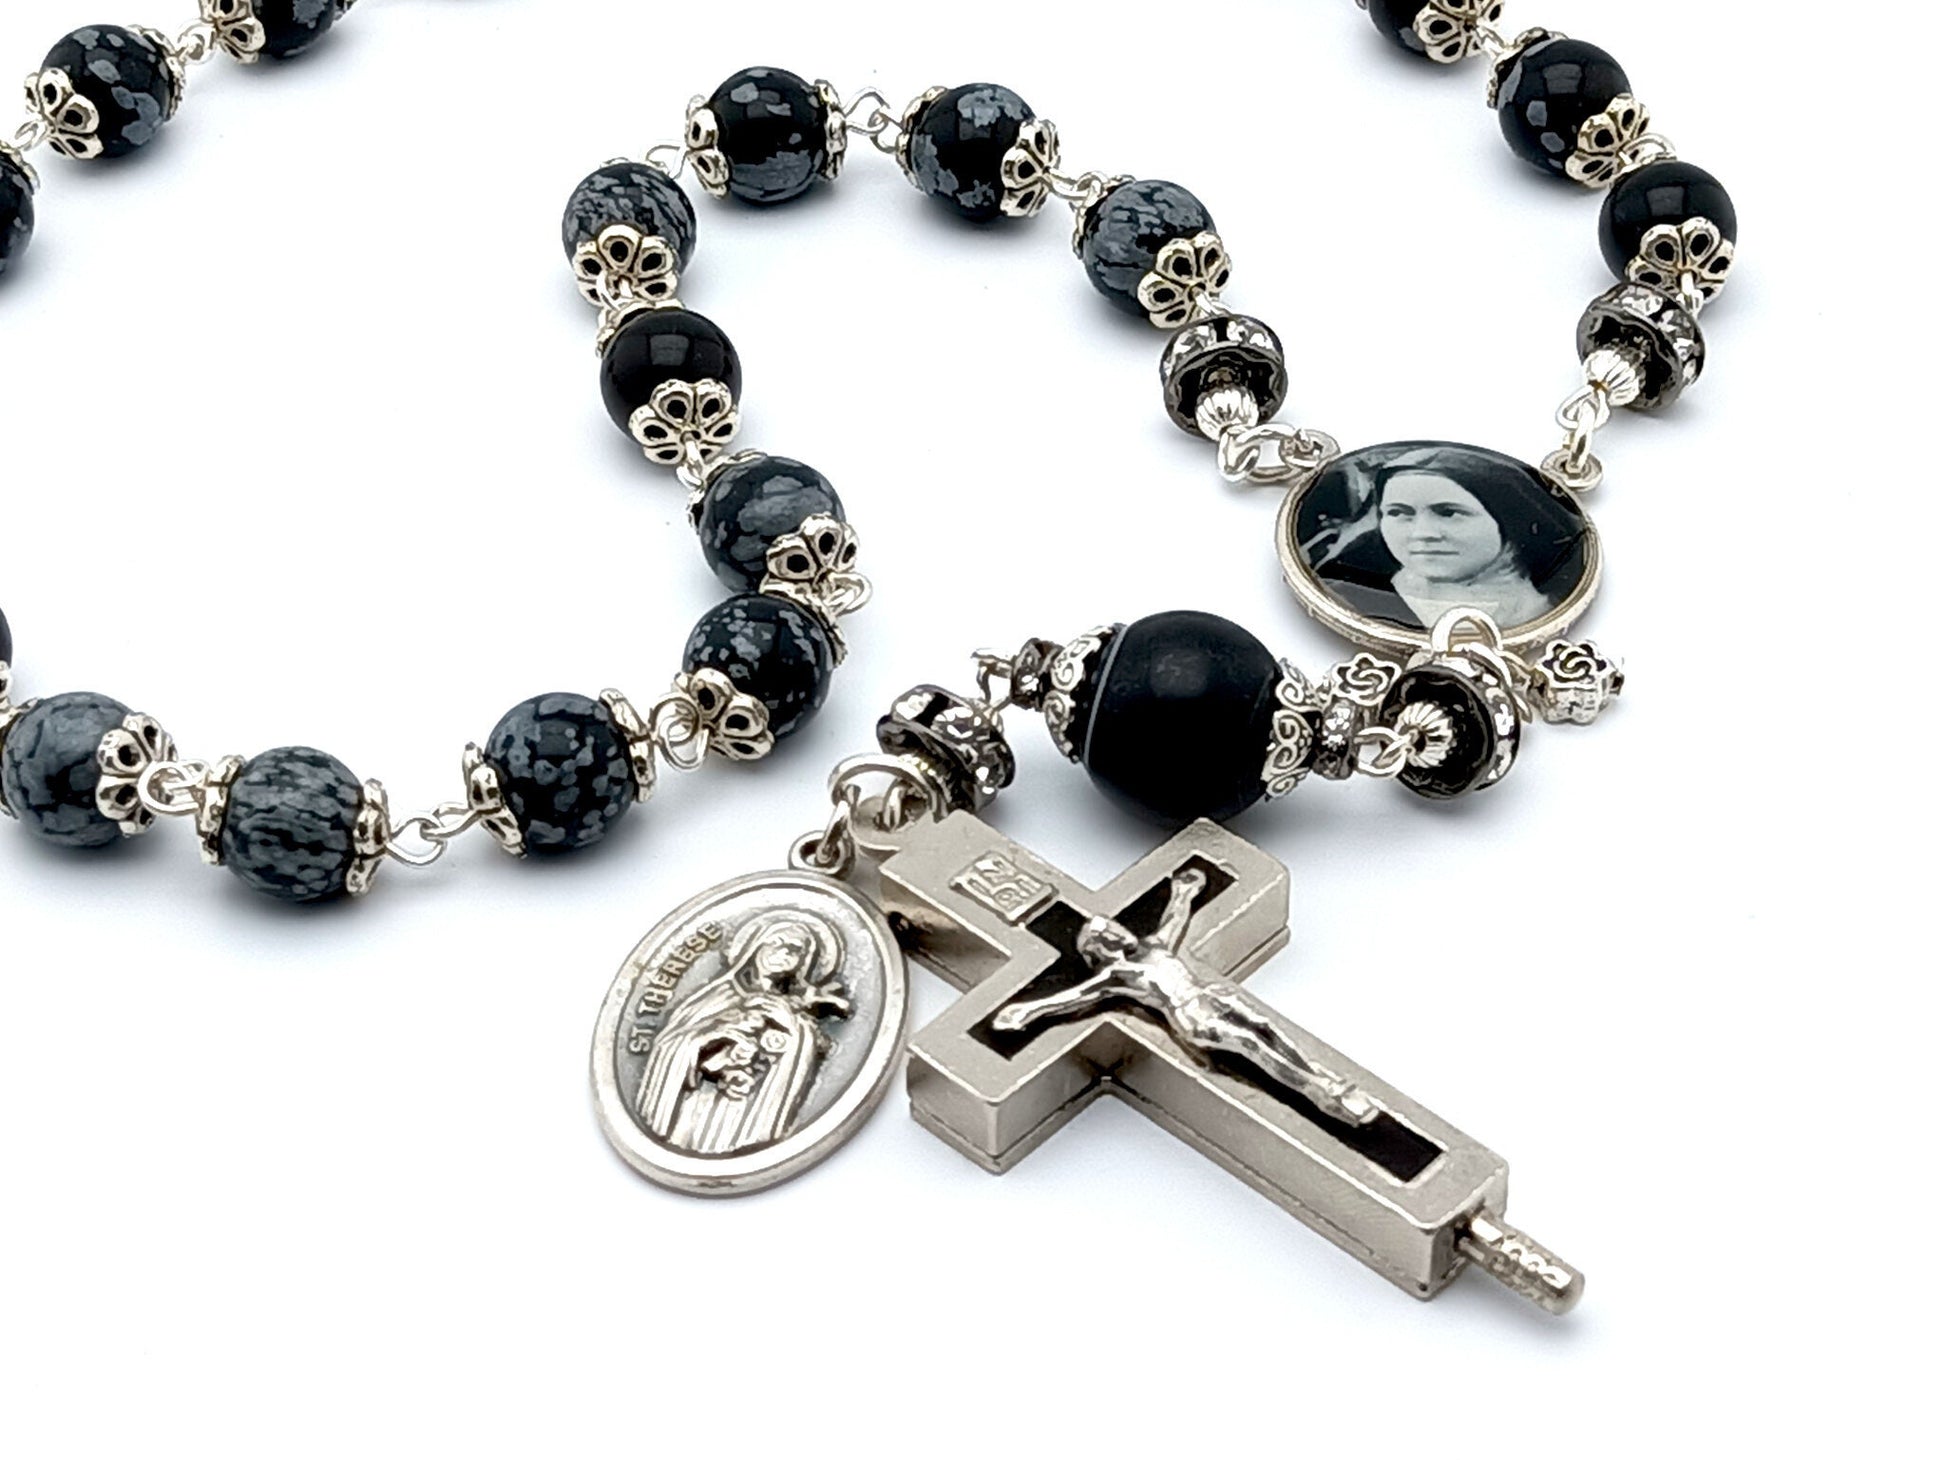 Saint Therese of Lisieux unique rosary beads prayer chaplet  with obsidian gemstone beads, relic holder crucifix and picture centre medal.